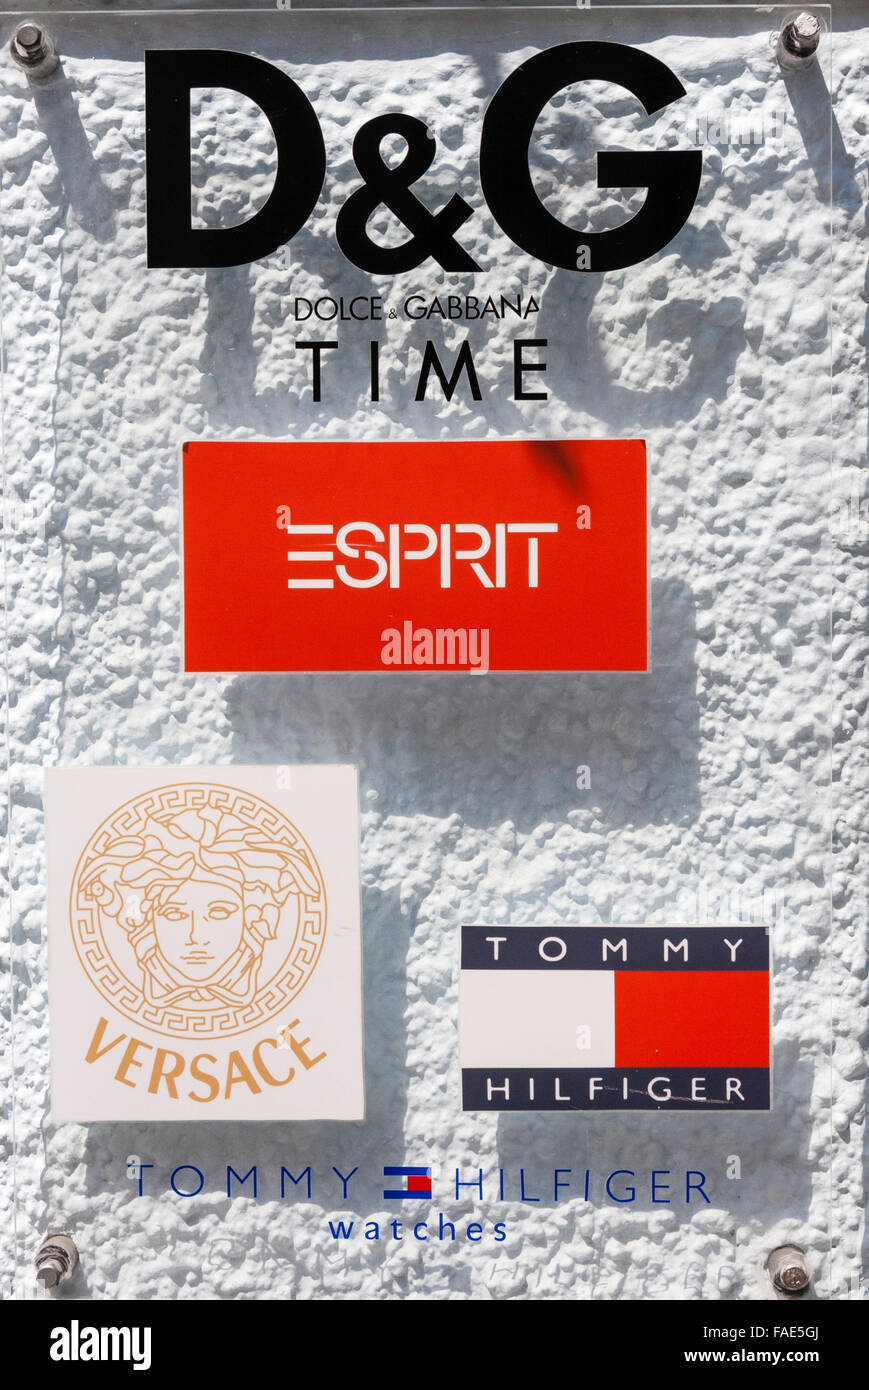 Greece. Plastic transparent sign with various band name logs on, D&G,  Espirit, Versace and "Tommy Hilfiger". Background whitewashed textured wall  Stock Photo - Alamy